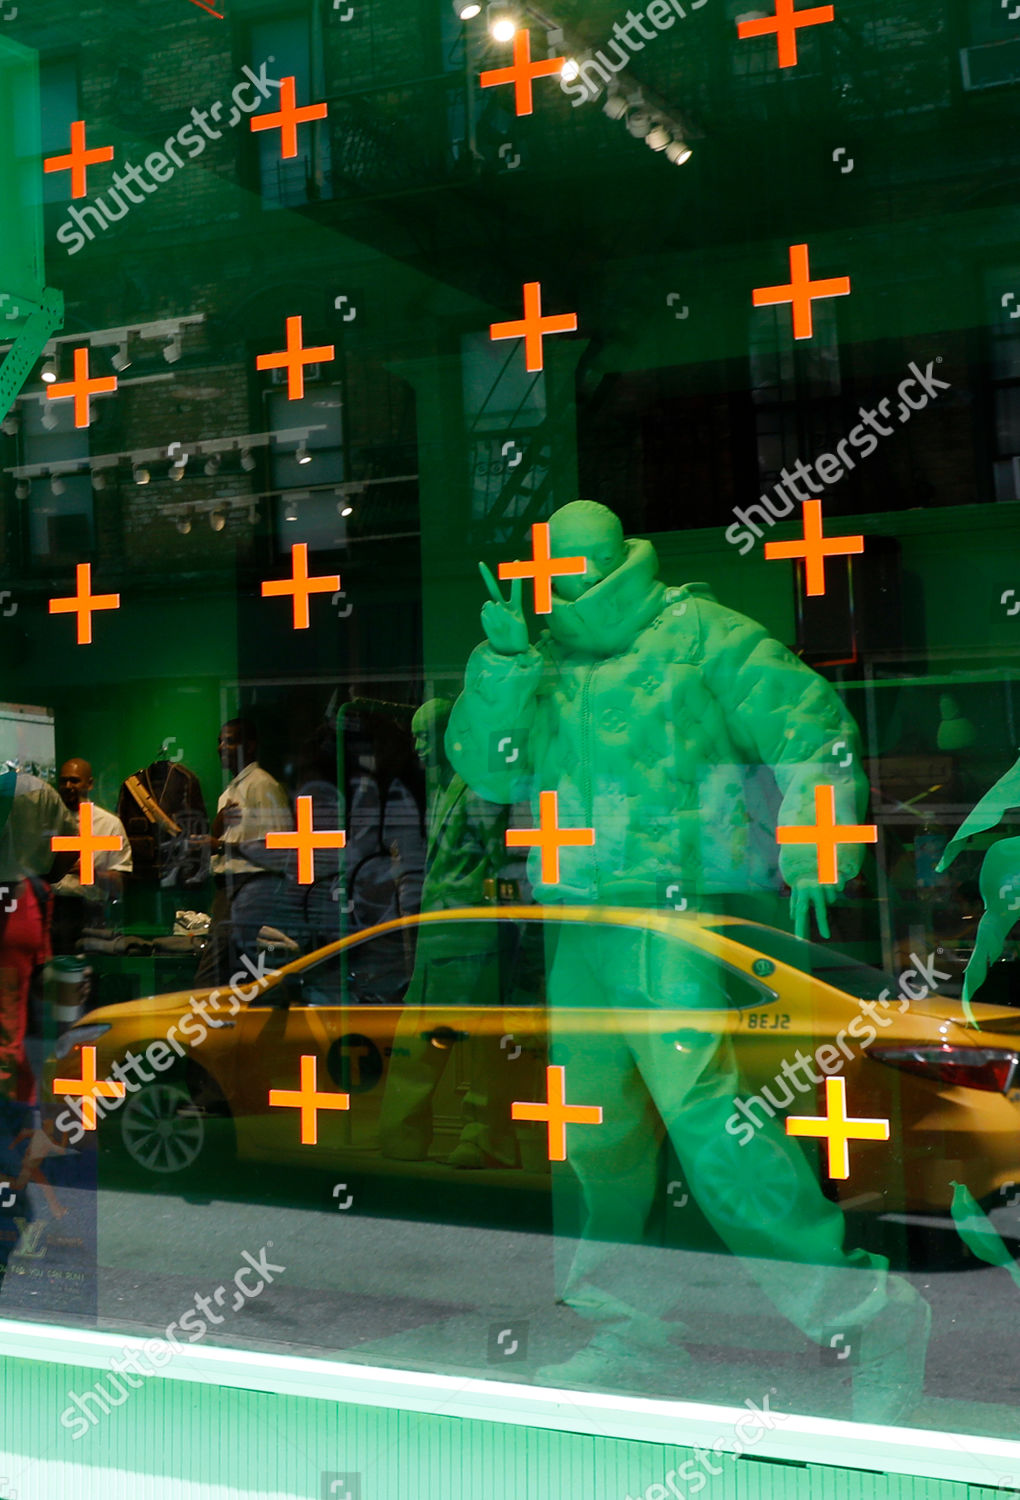 Louis Vuitton's Pop-Up in New York City Is Completely Green